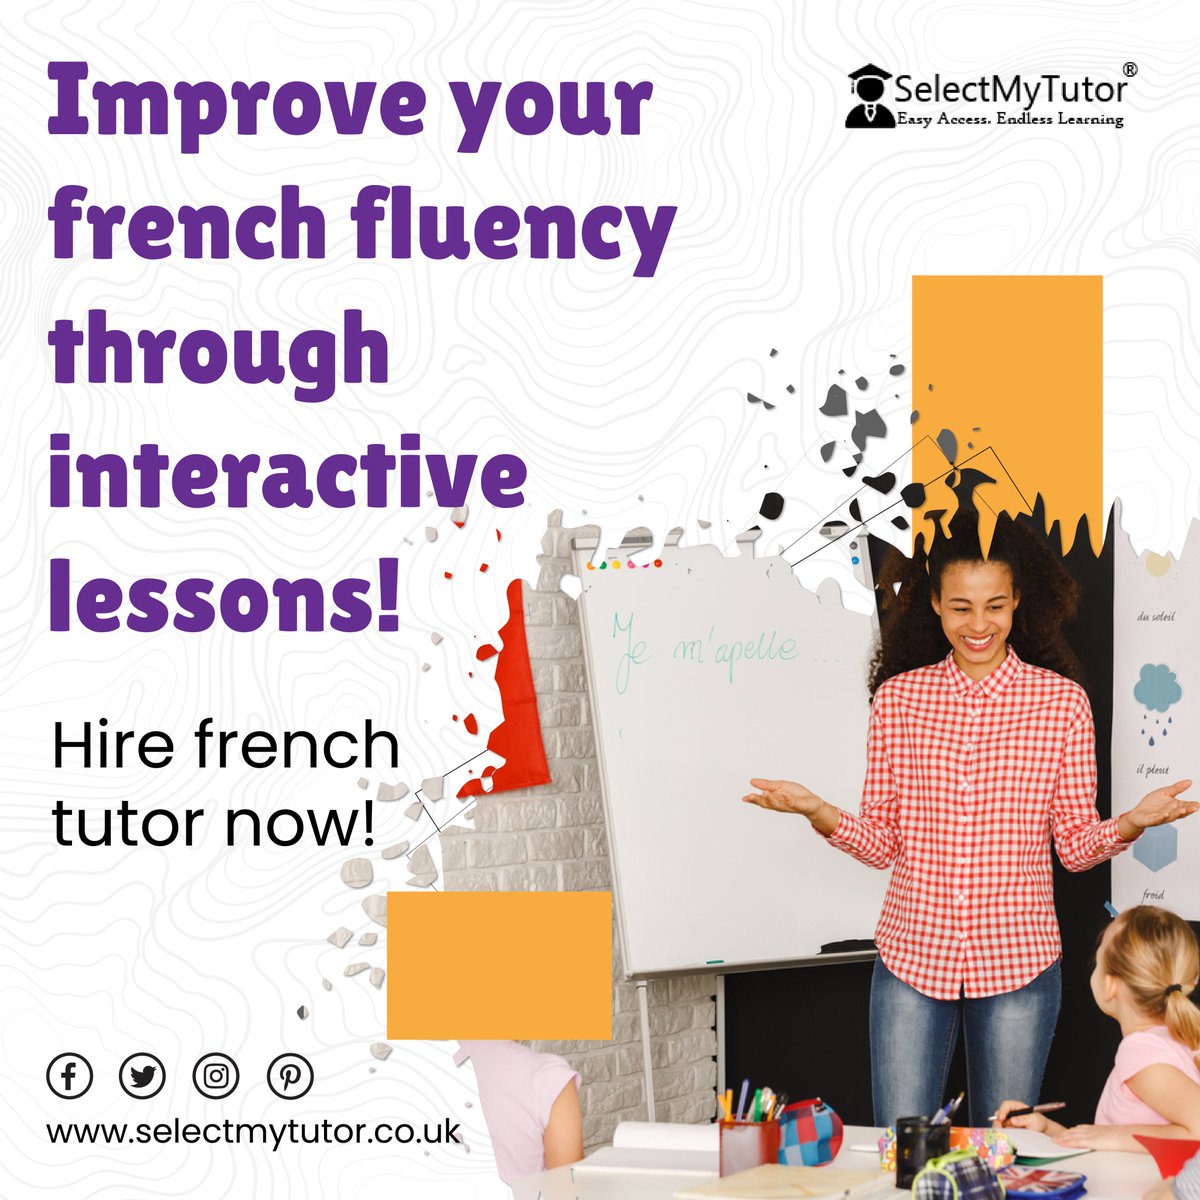 Choose from hundreds of online native #Frenchtutors. Browse teacher profiles today and schedule a time to start flexible learning.
.
Follow #SelectMyTutor for more.
bit.ly/3L253ul
#drawingtutor #economictutor #englishtutor #onlinetutors #artstutor #chemistrytutor